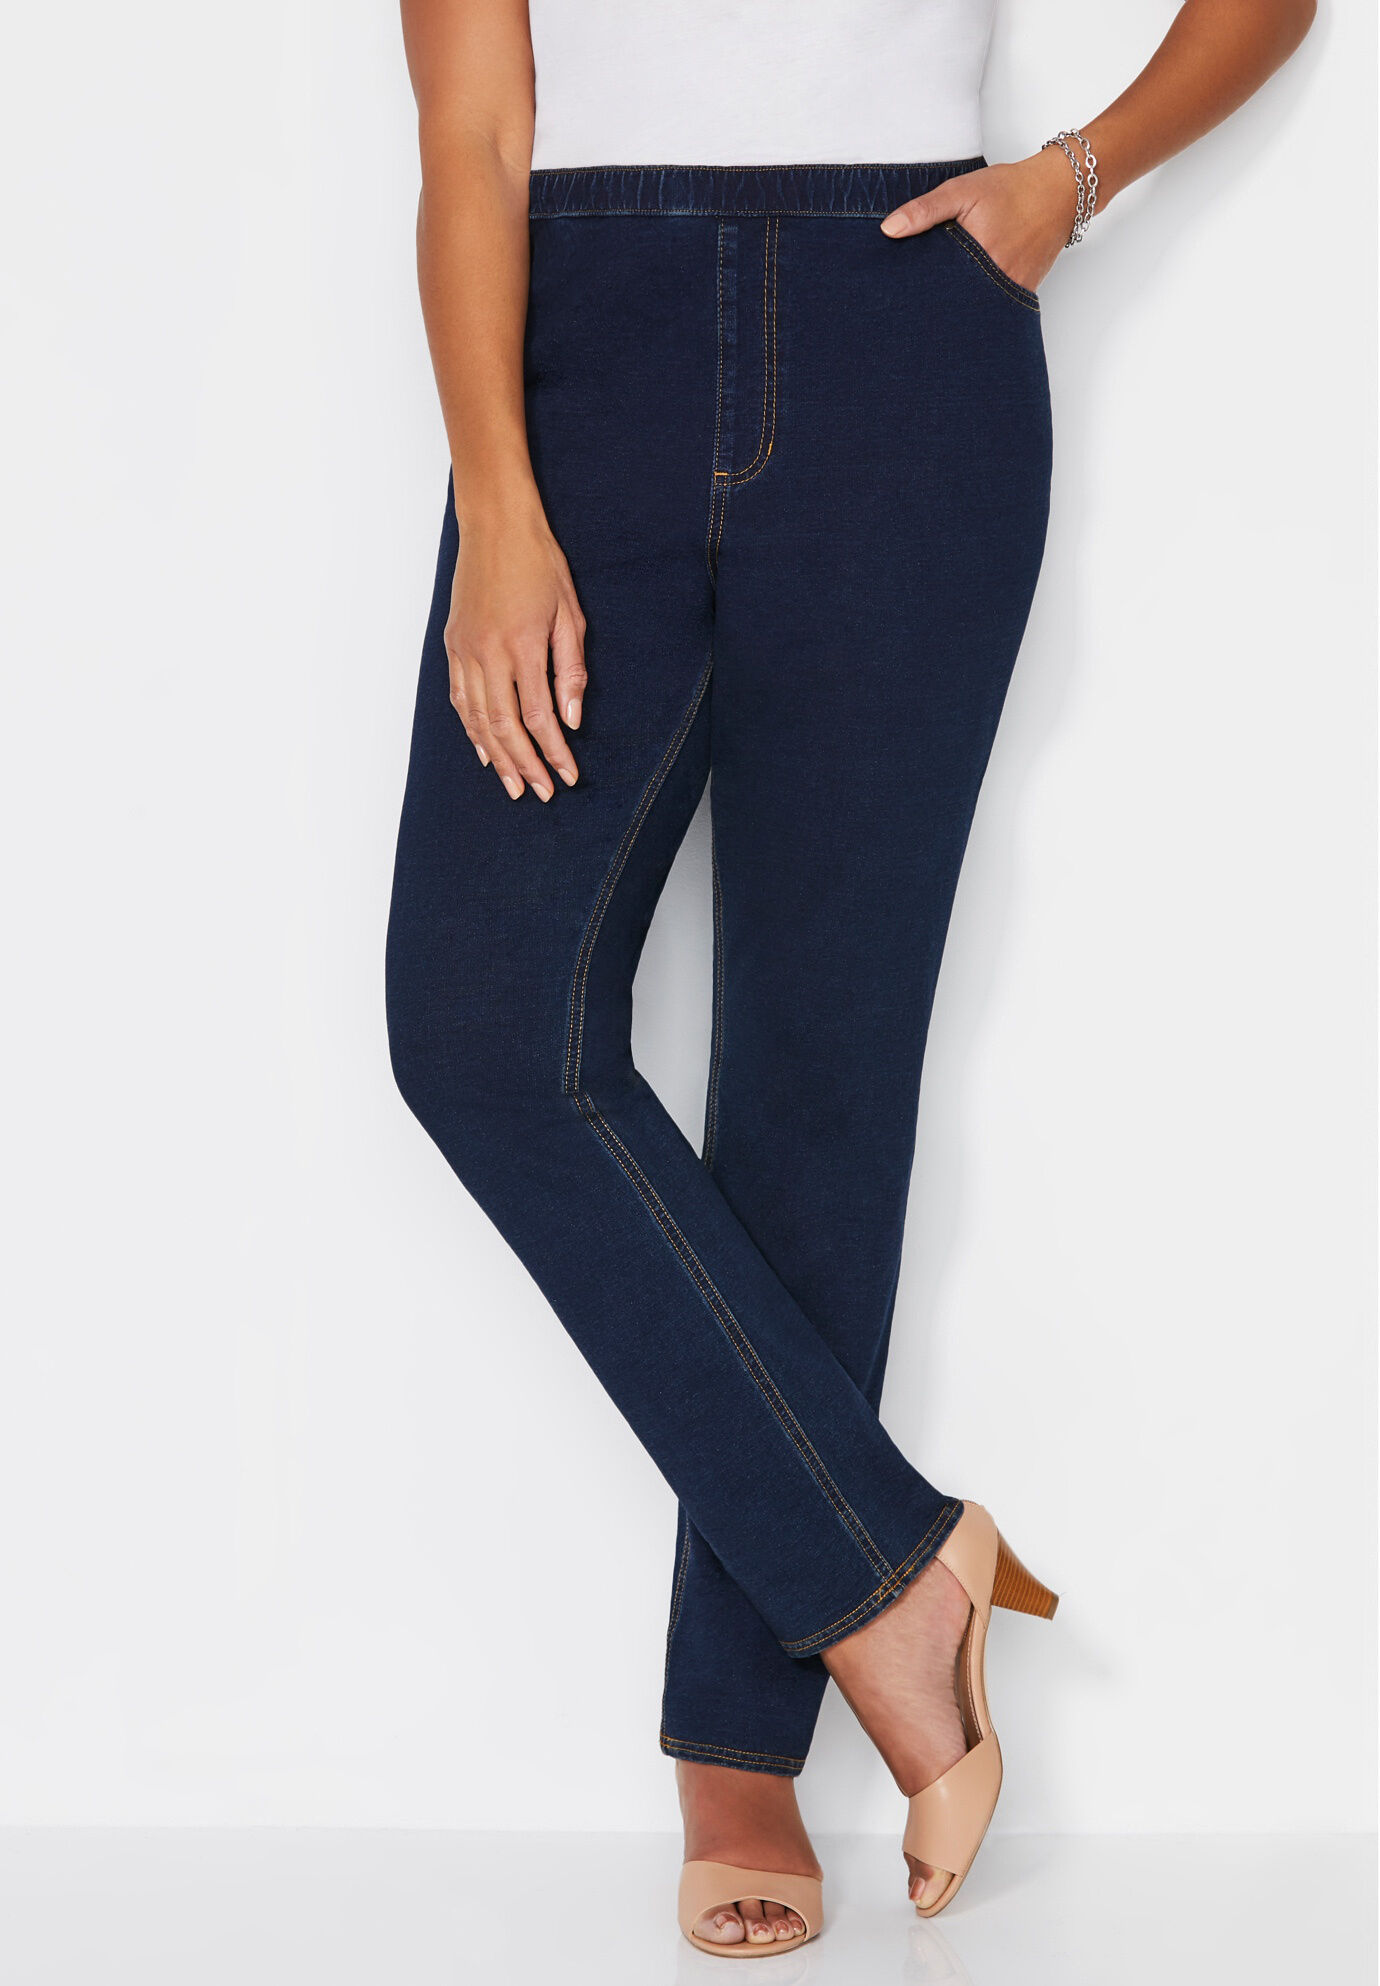 The Knit Jean | Catherine's